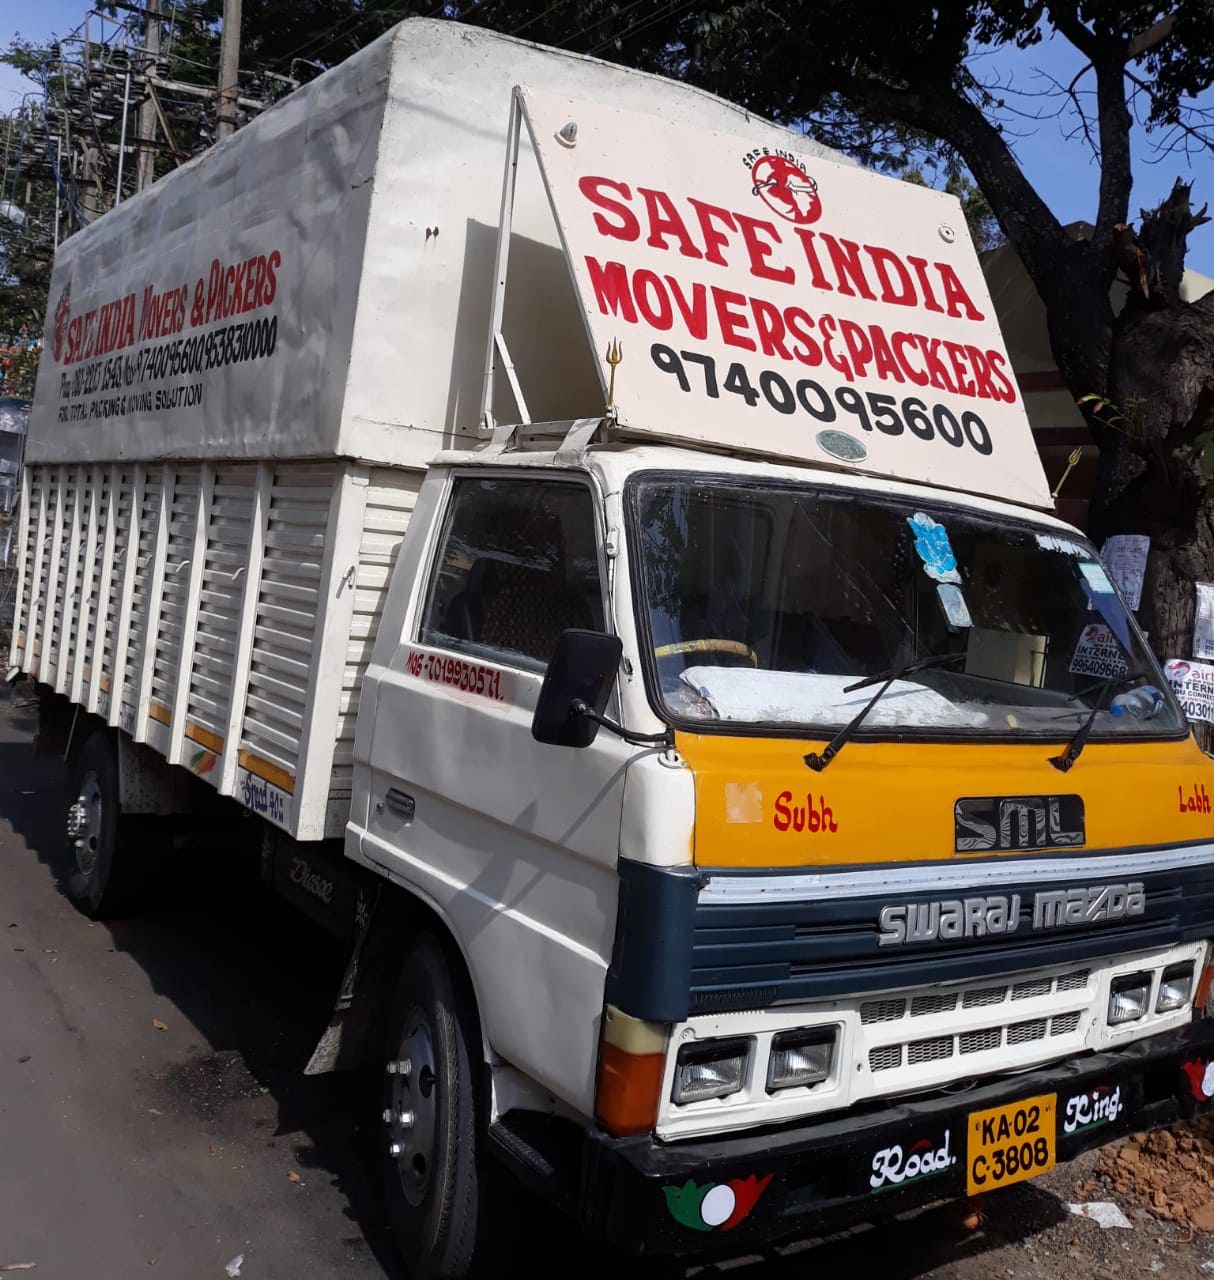 Safe india Movers And Packers are professional Movers and Packers